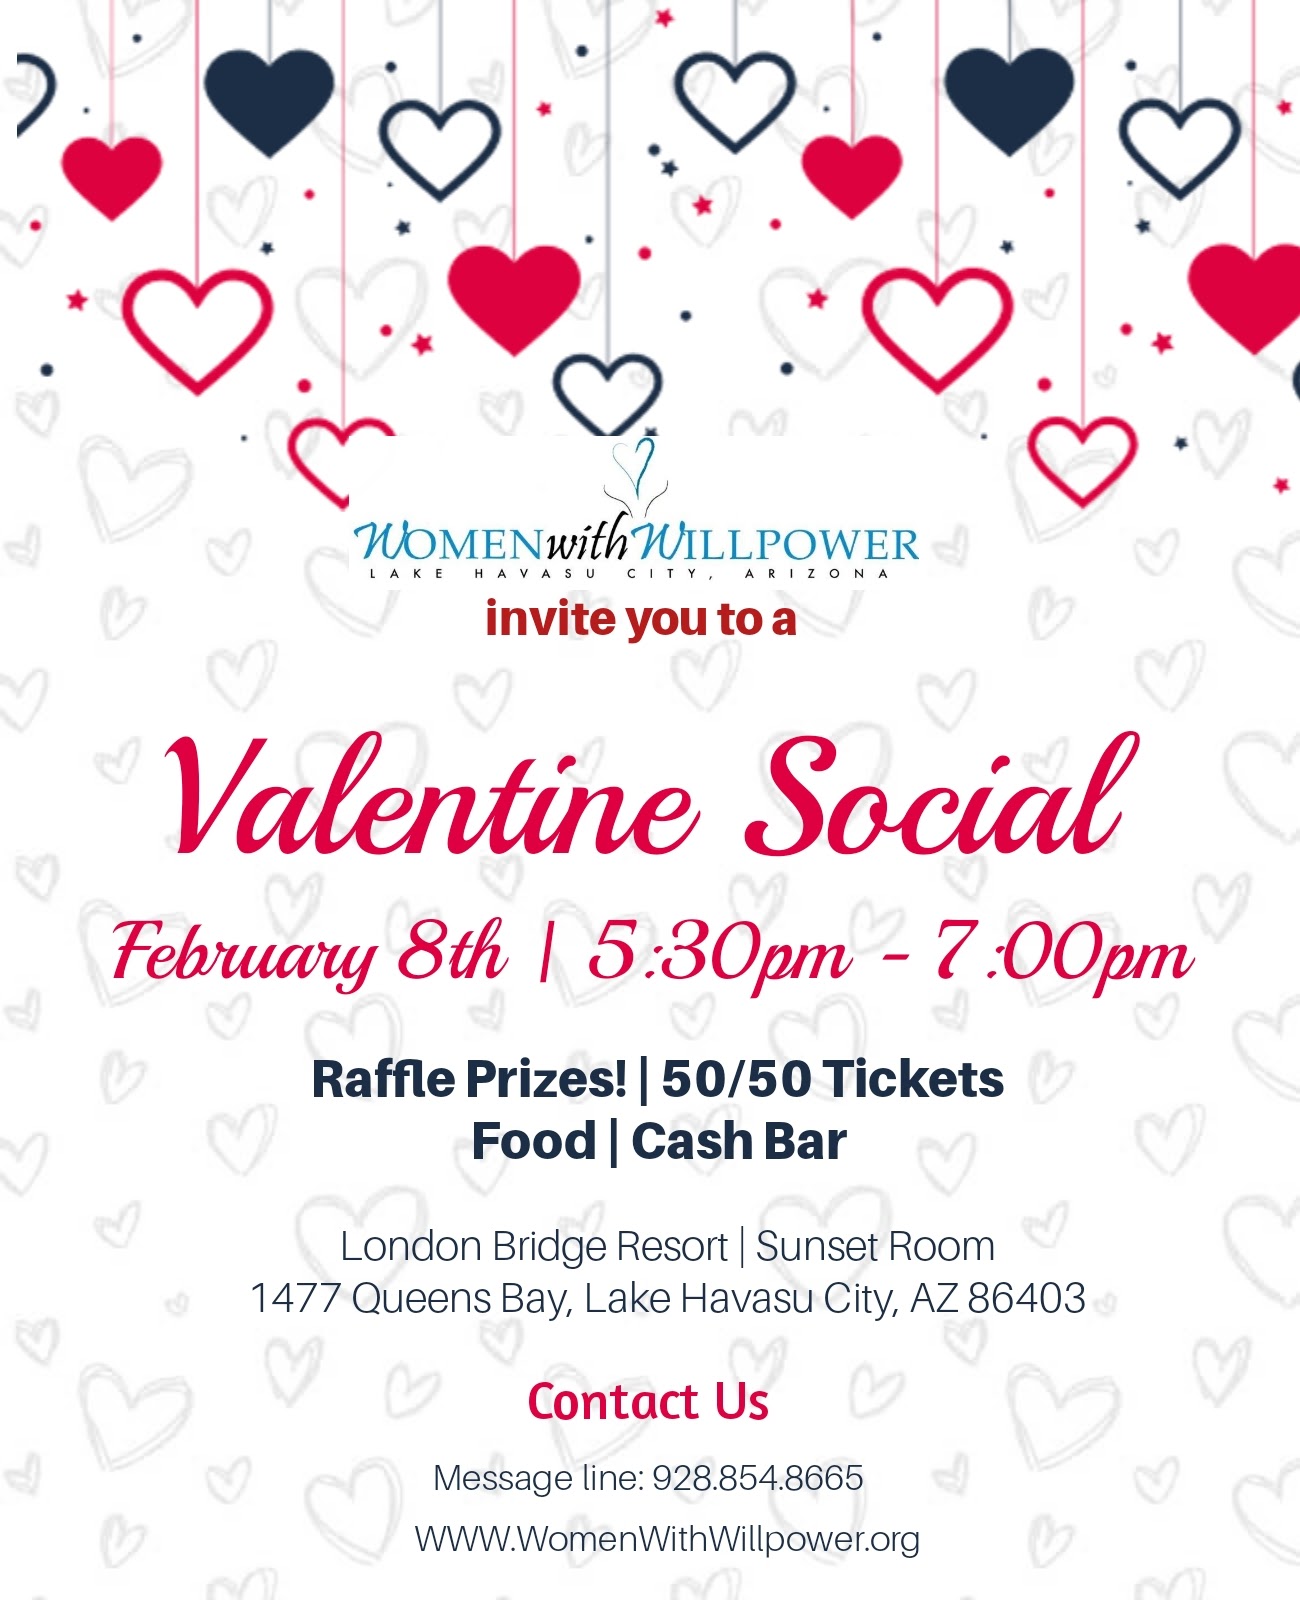 February social with Women with Willpower